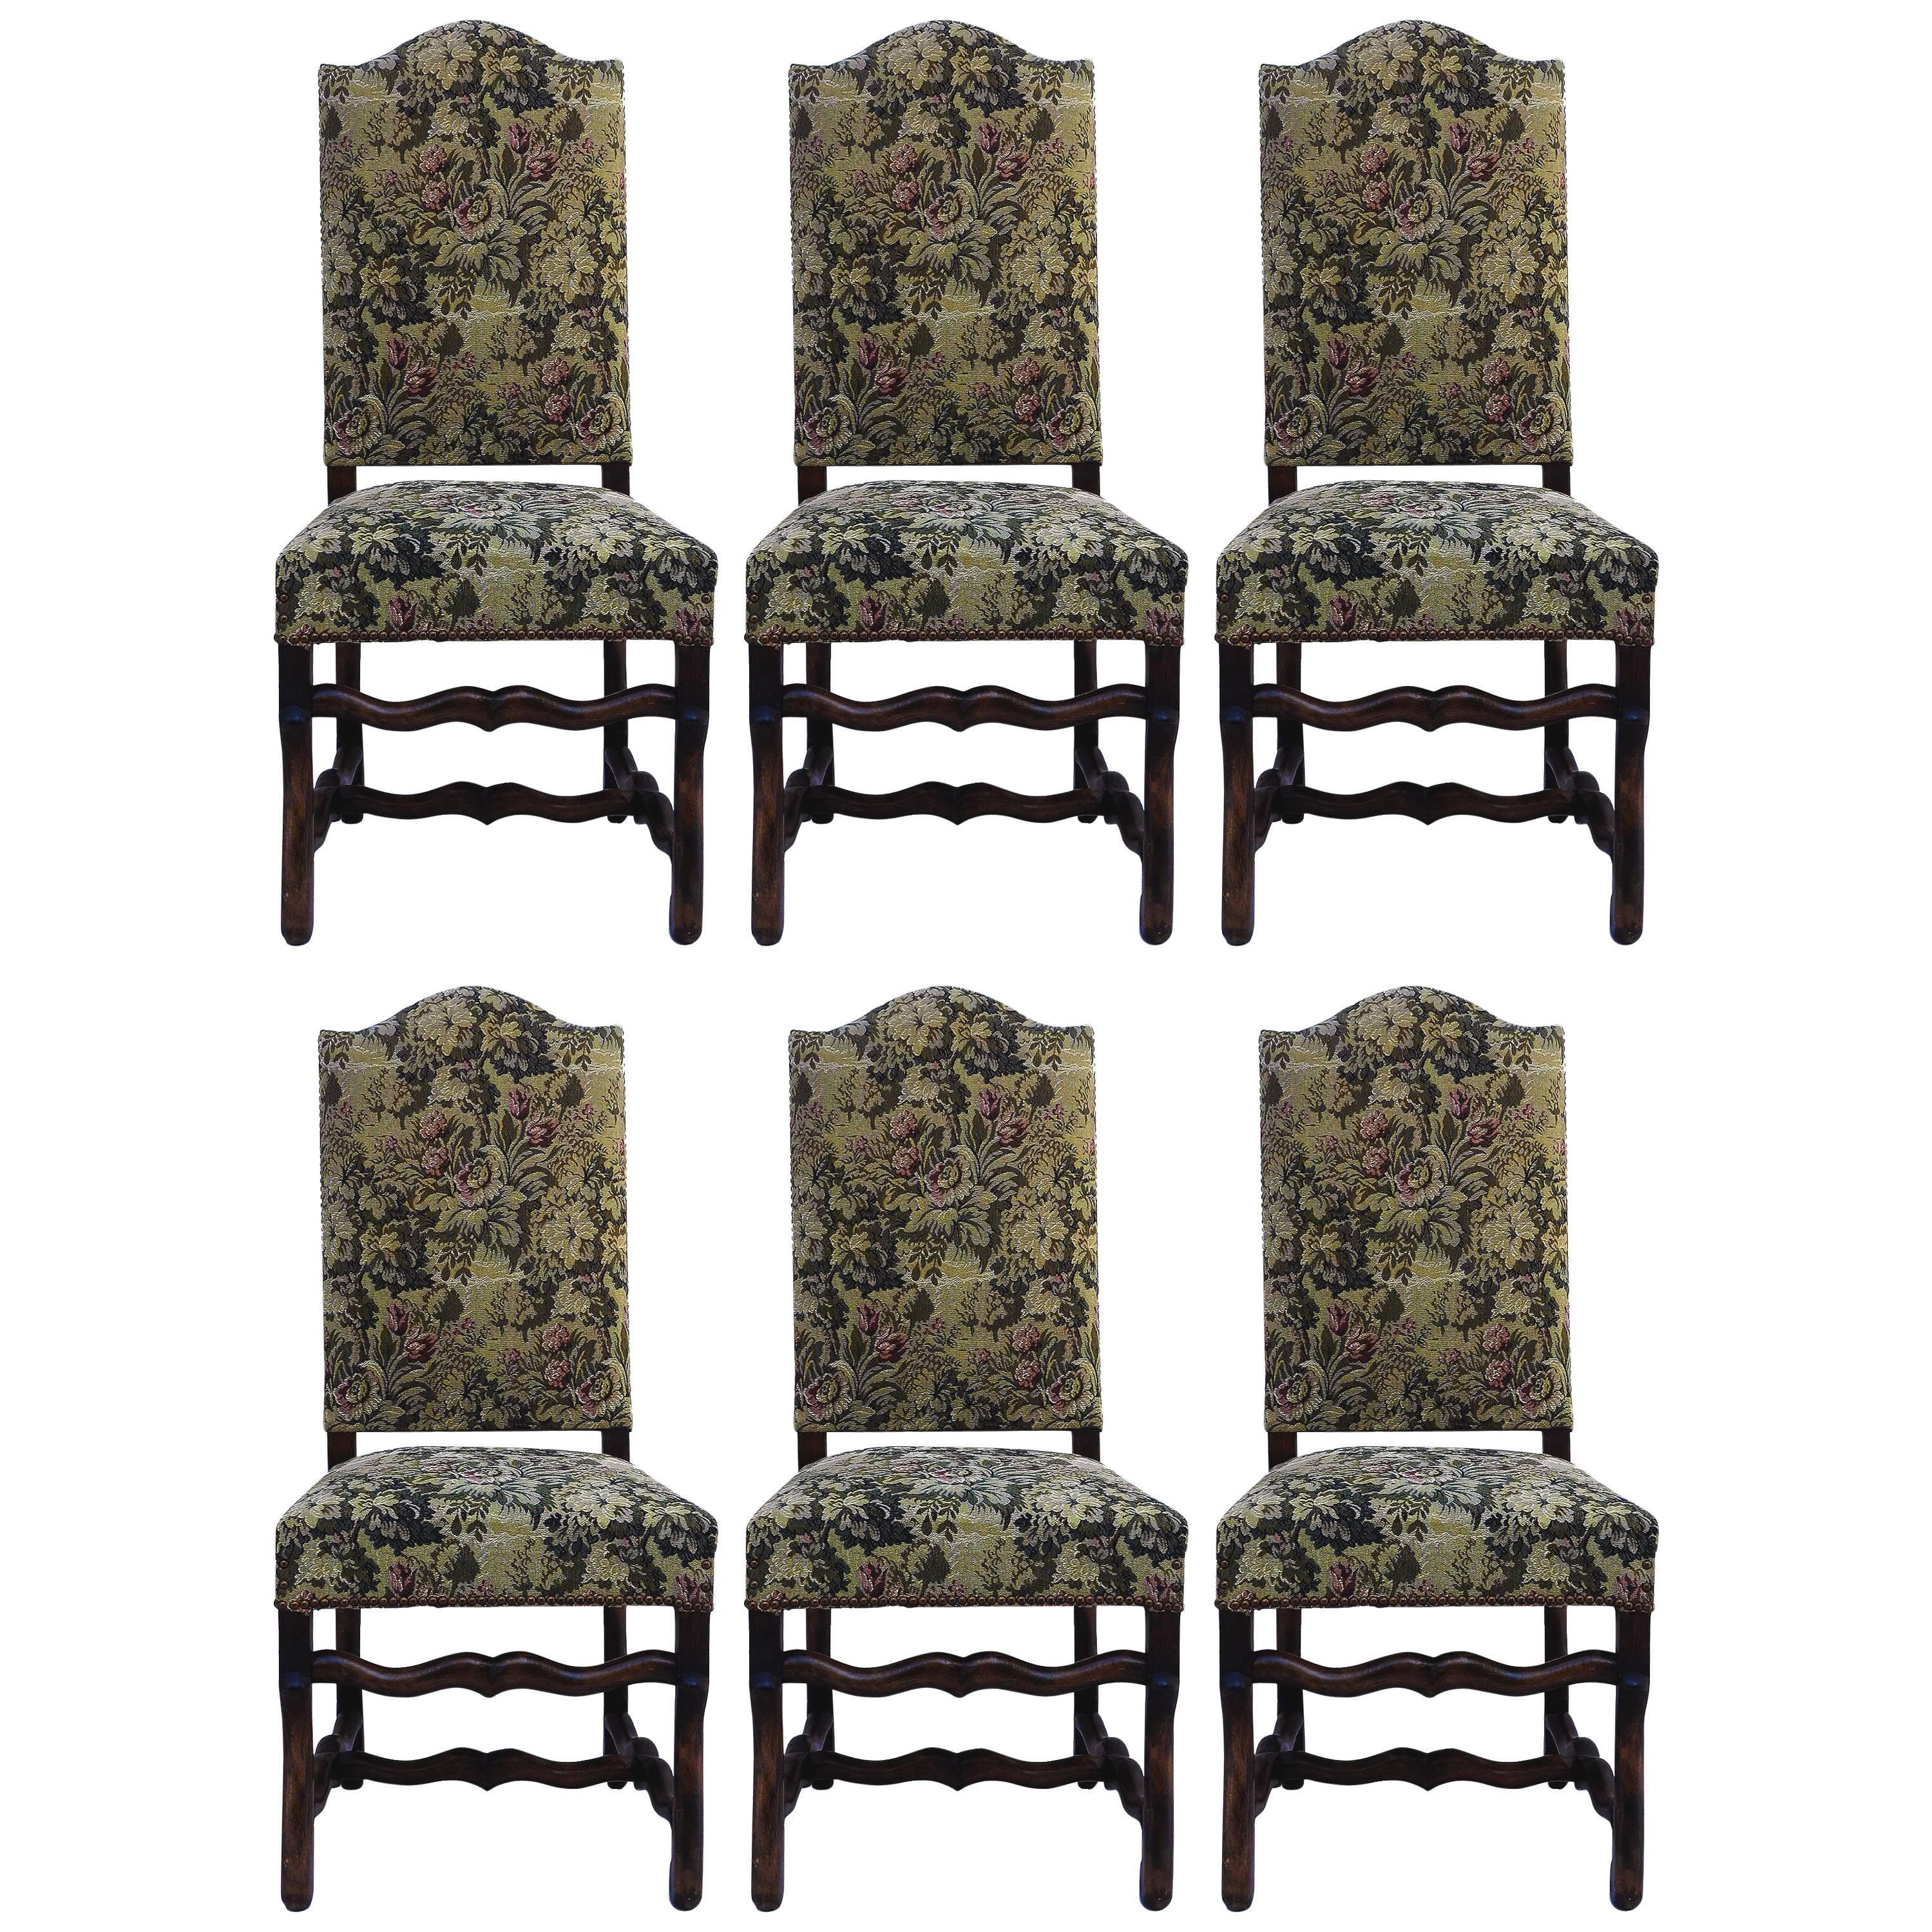 Six Dining Chairs Os de Mouton Original French Tapestry or to Recover